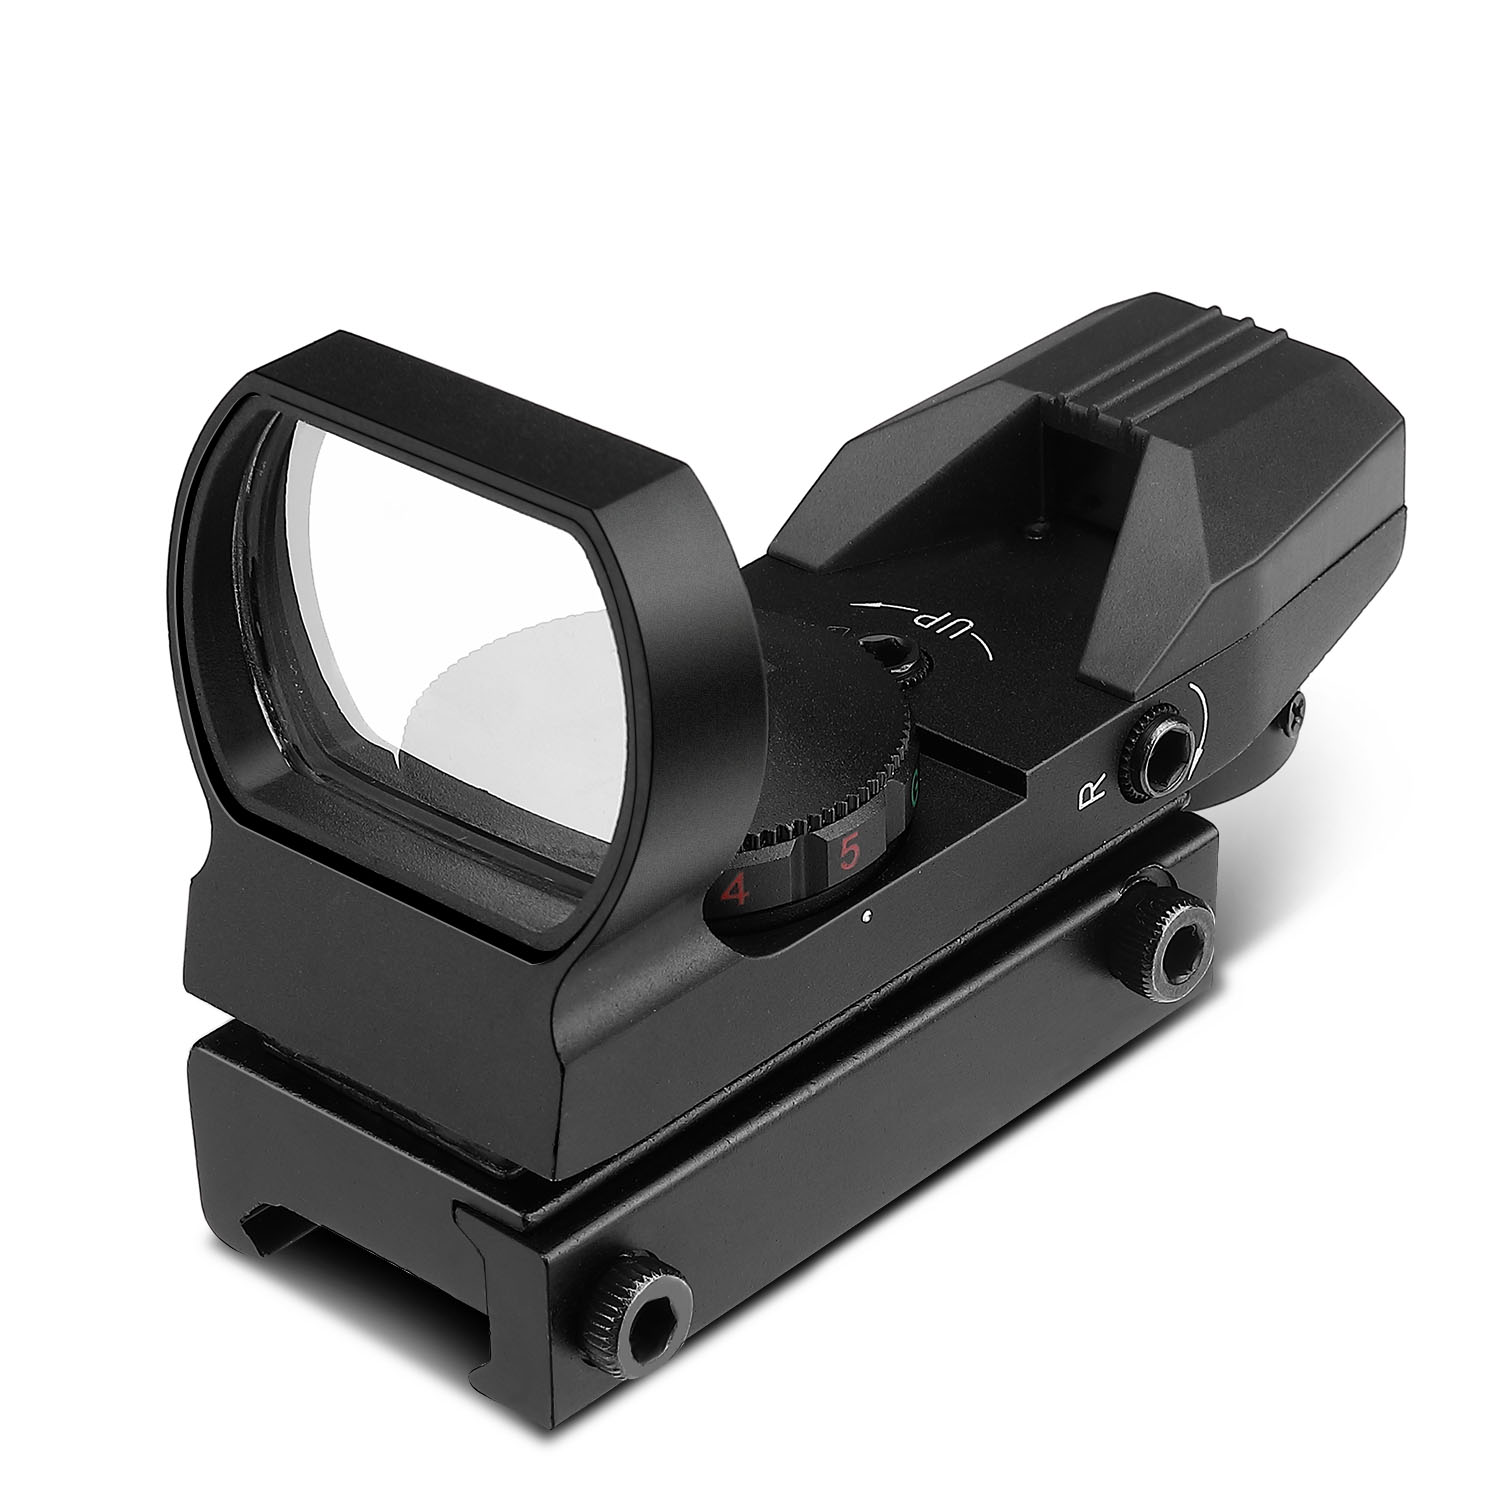 Holographic Laser Sight Scope Reflex For Red /Green Dot Reticle Picatinny Rail 